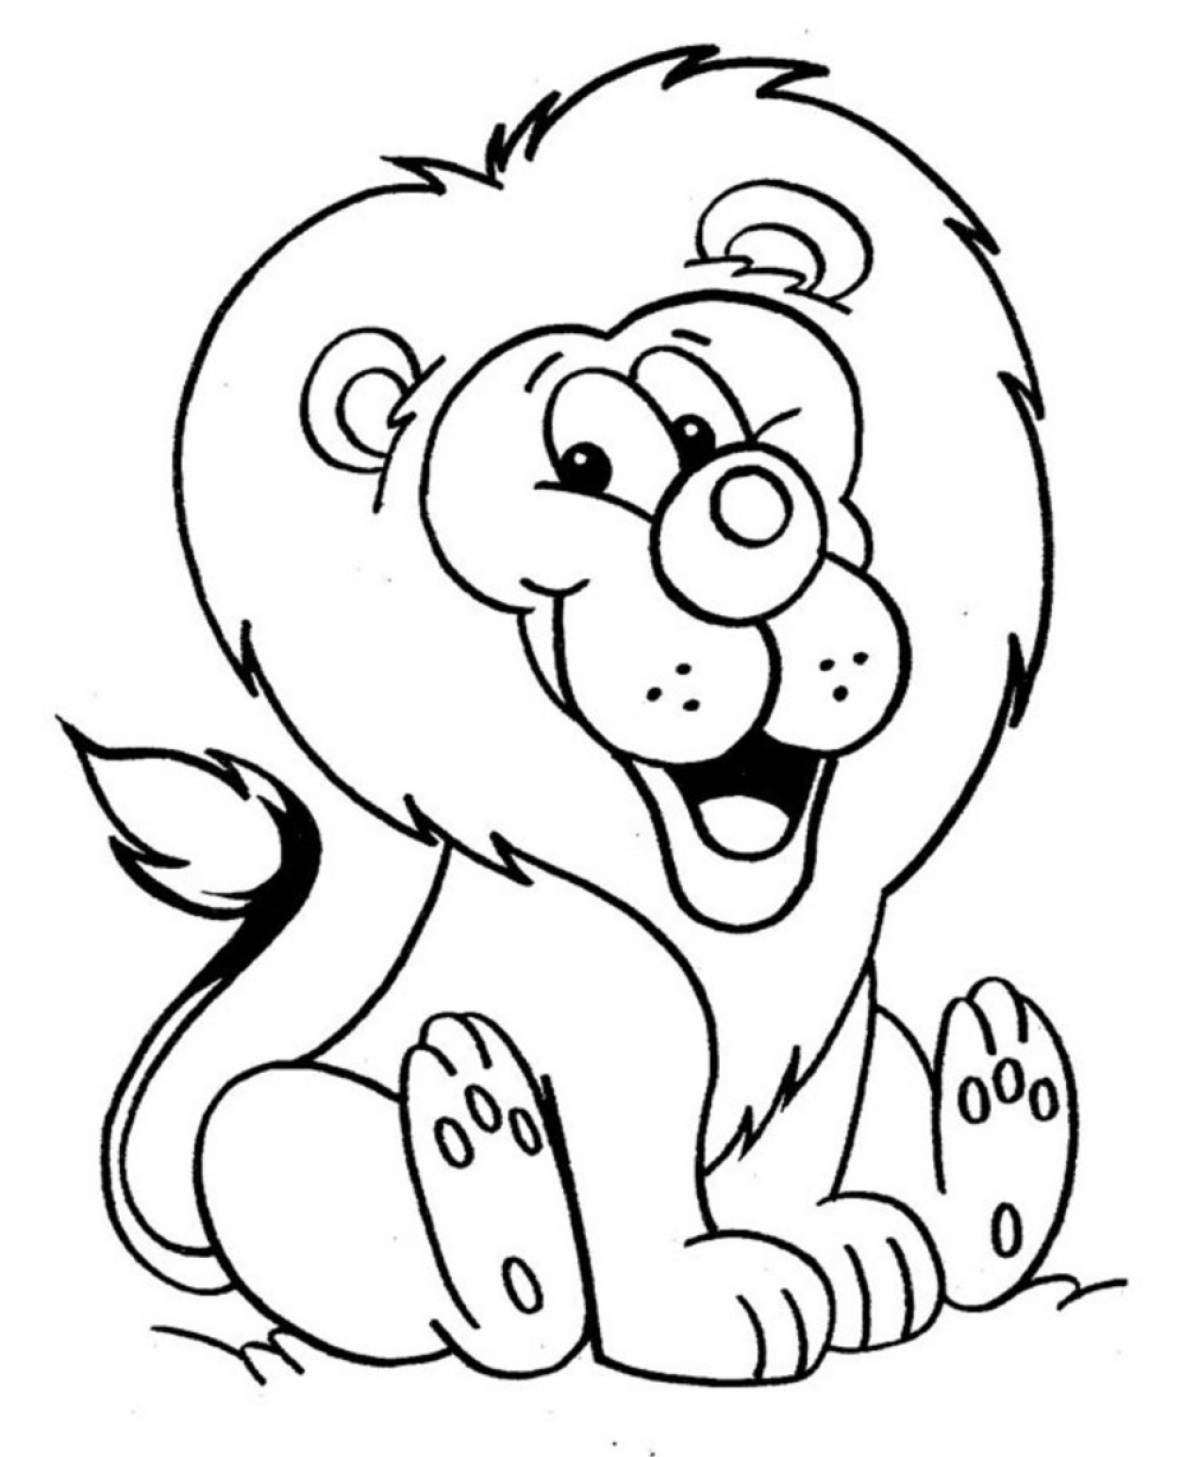 Adorable lion coloring page for 3-4 year olds